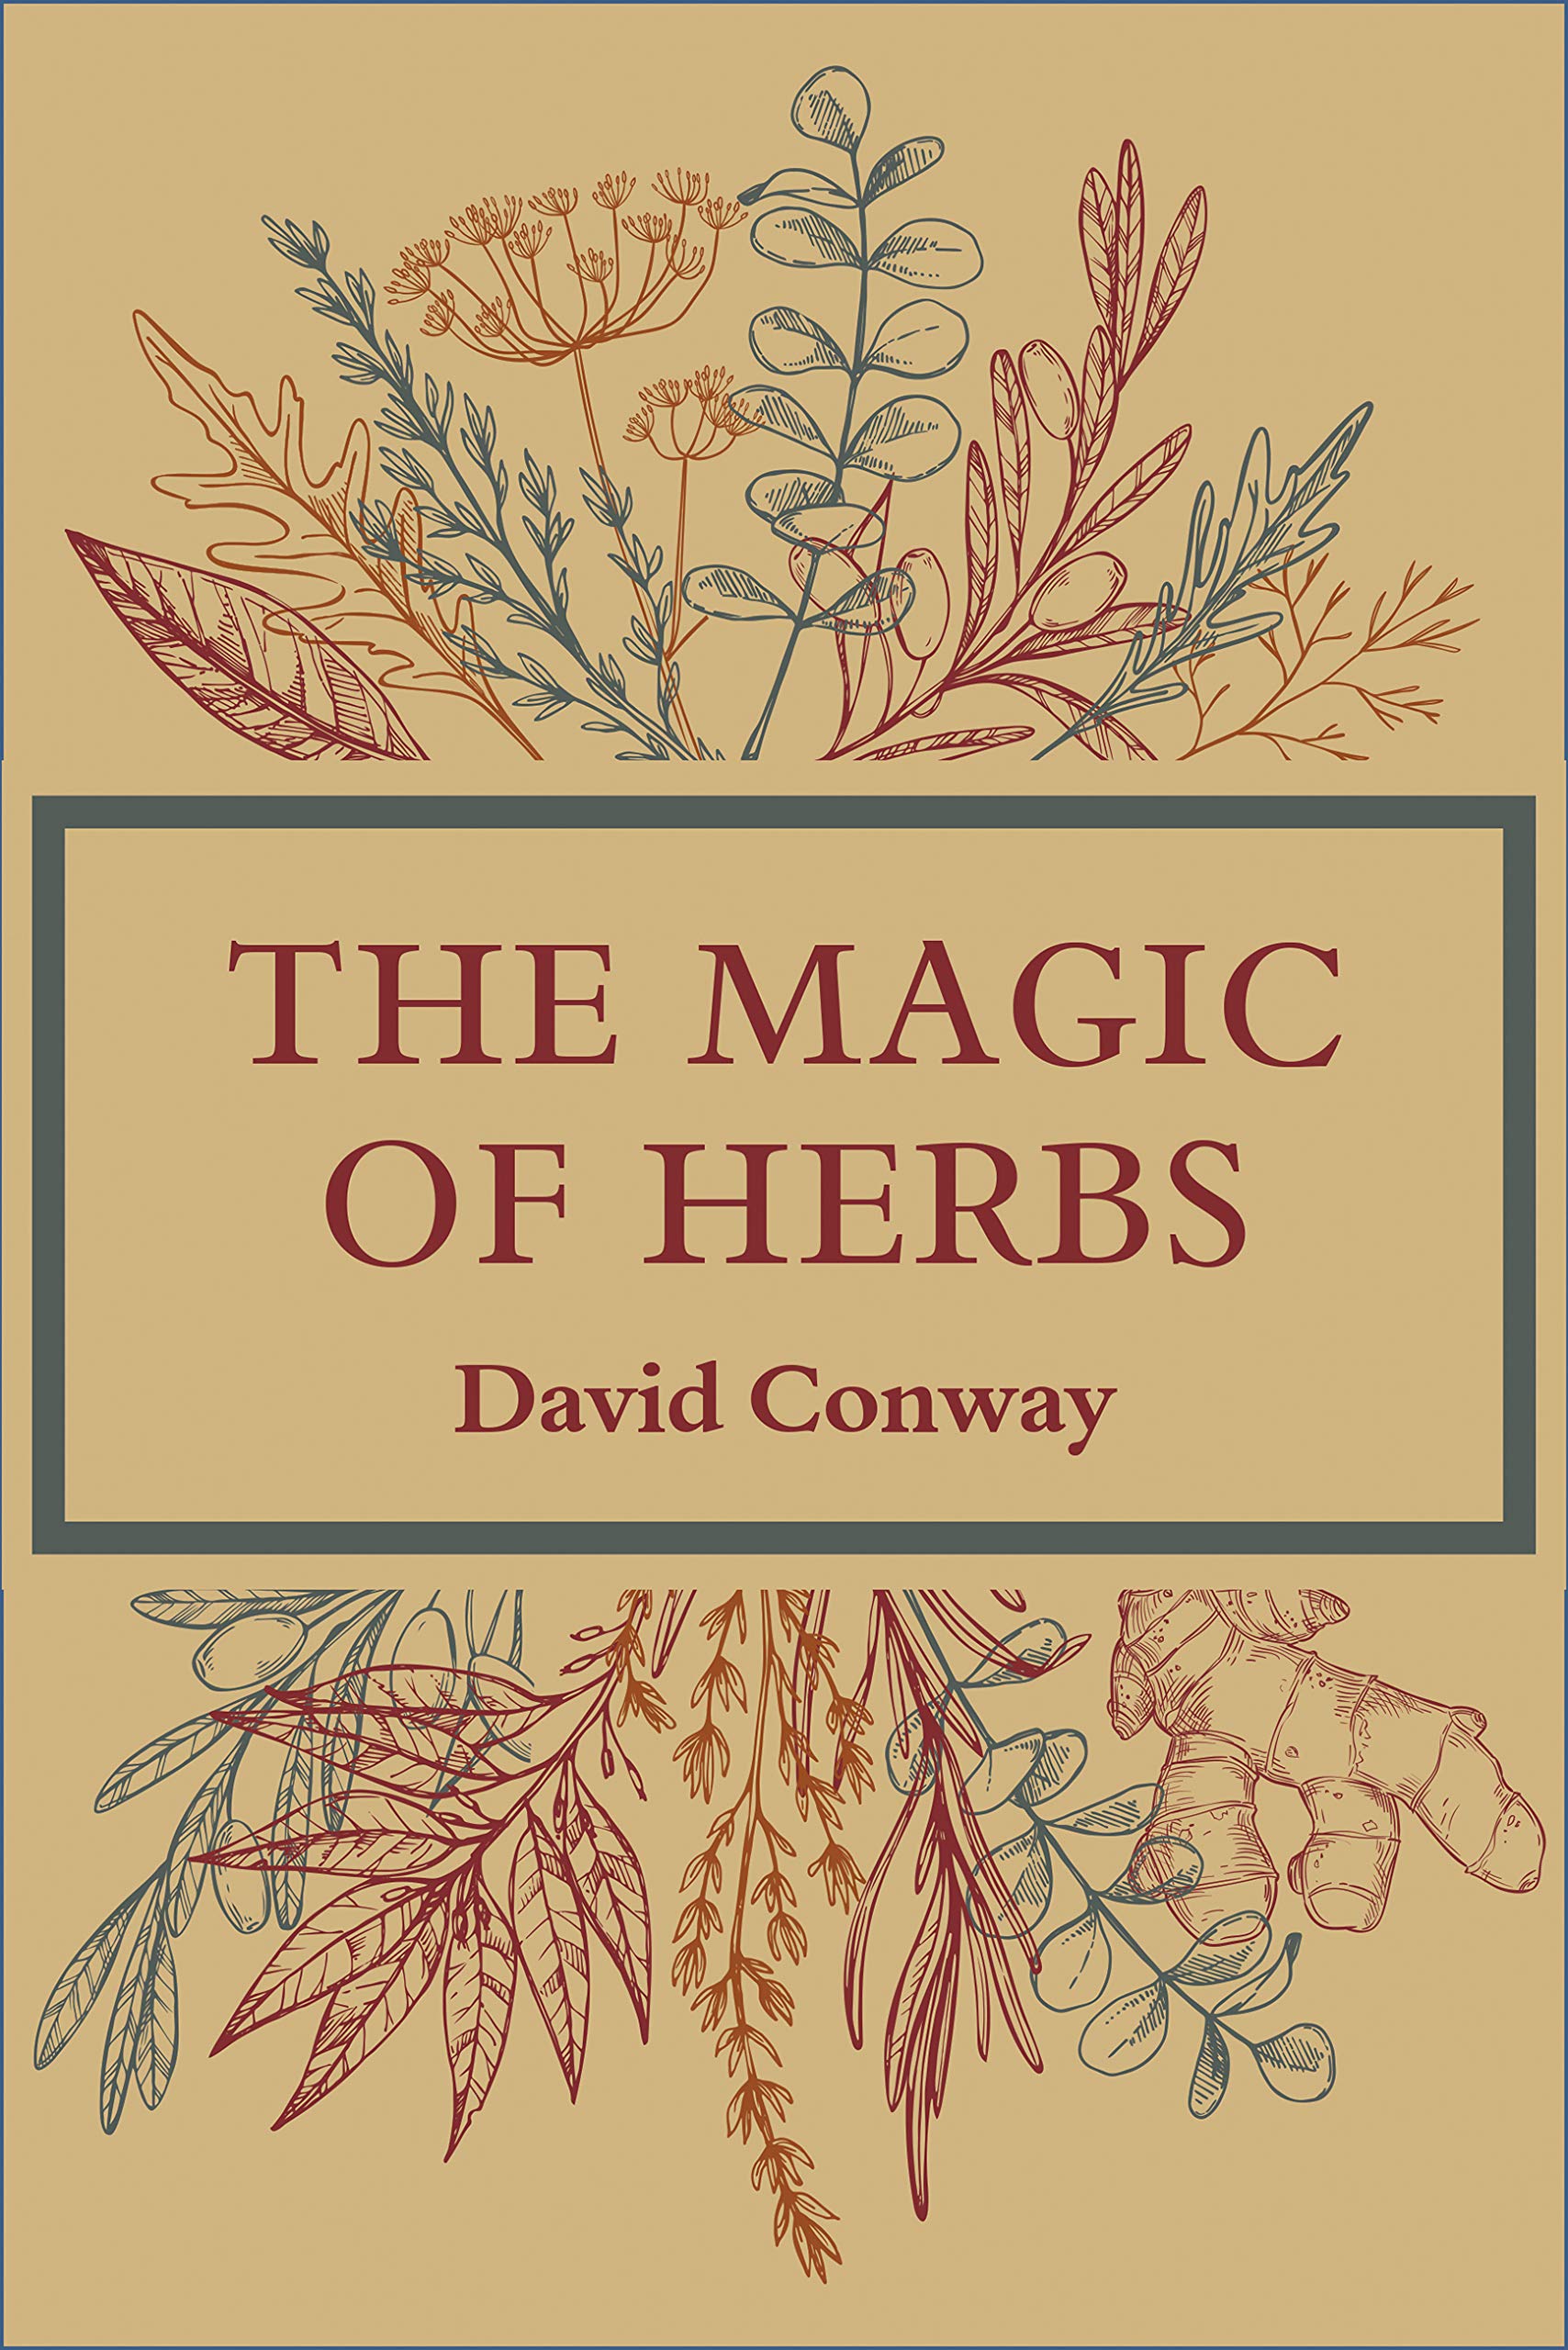 The Magic of Herbs by David Conway